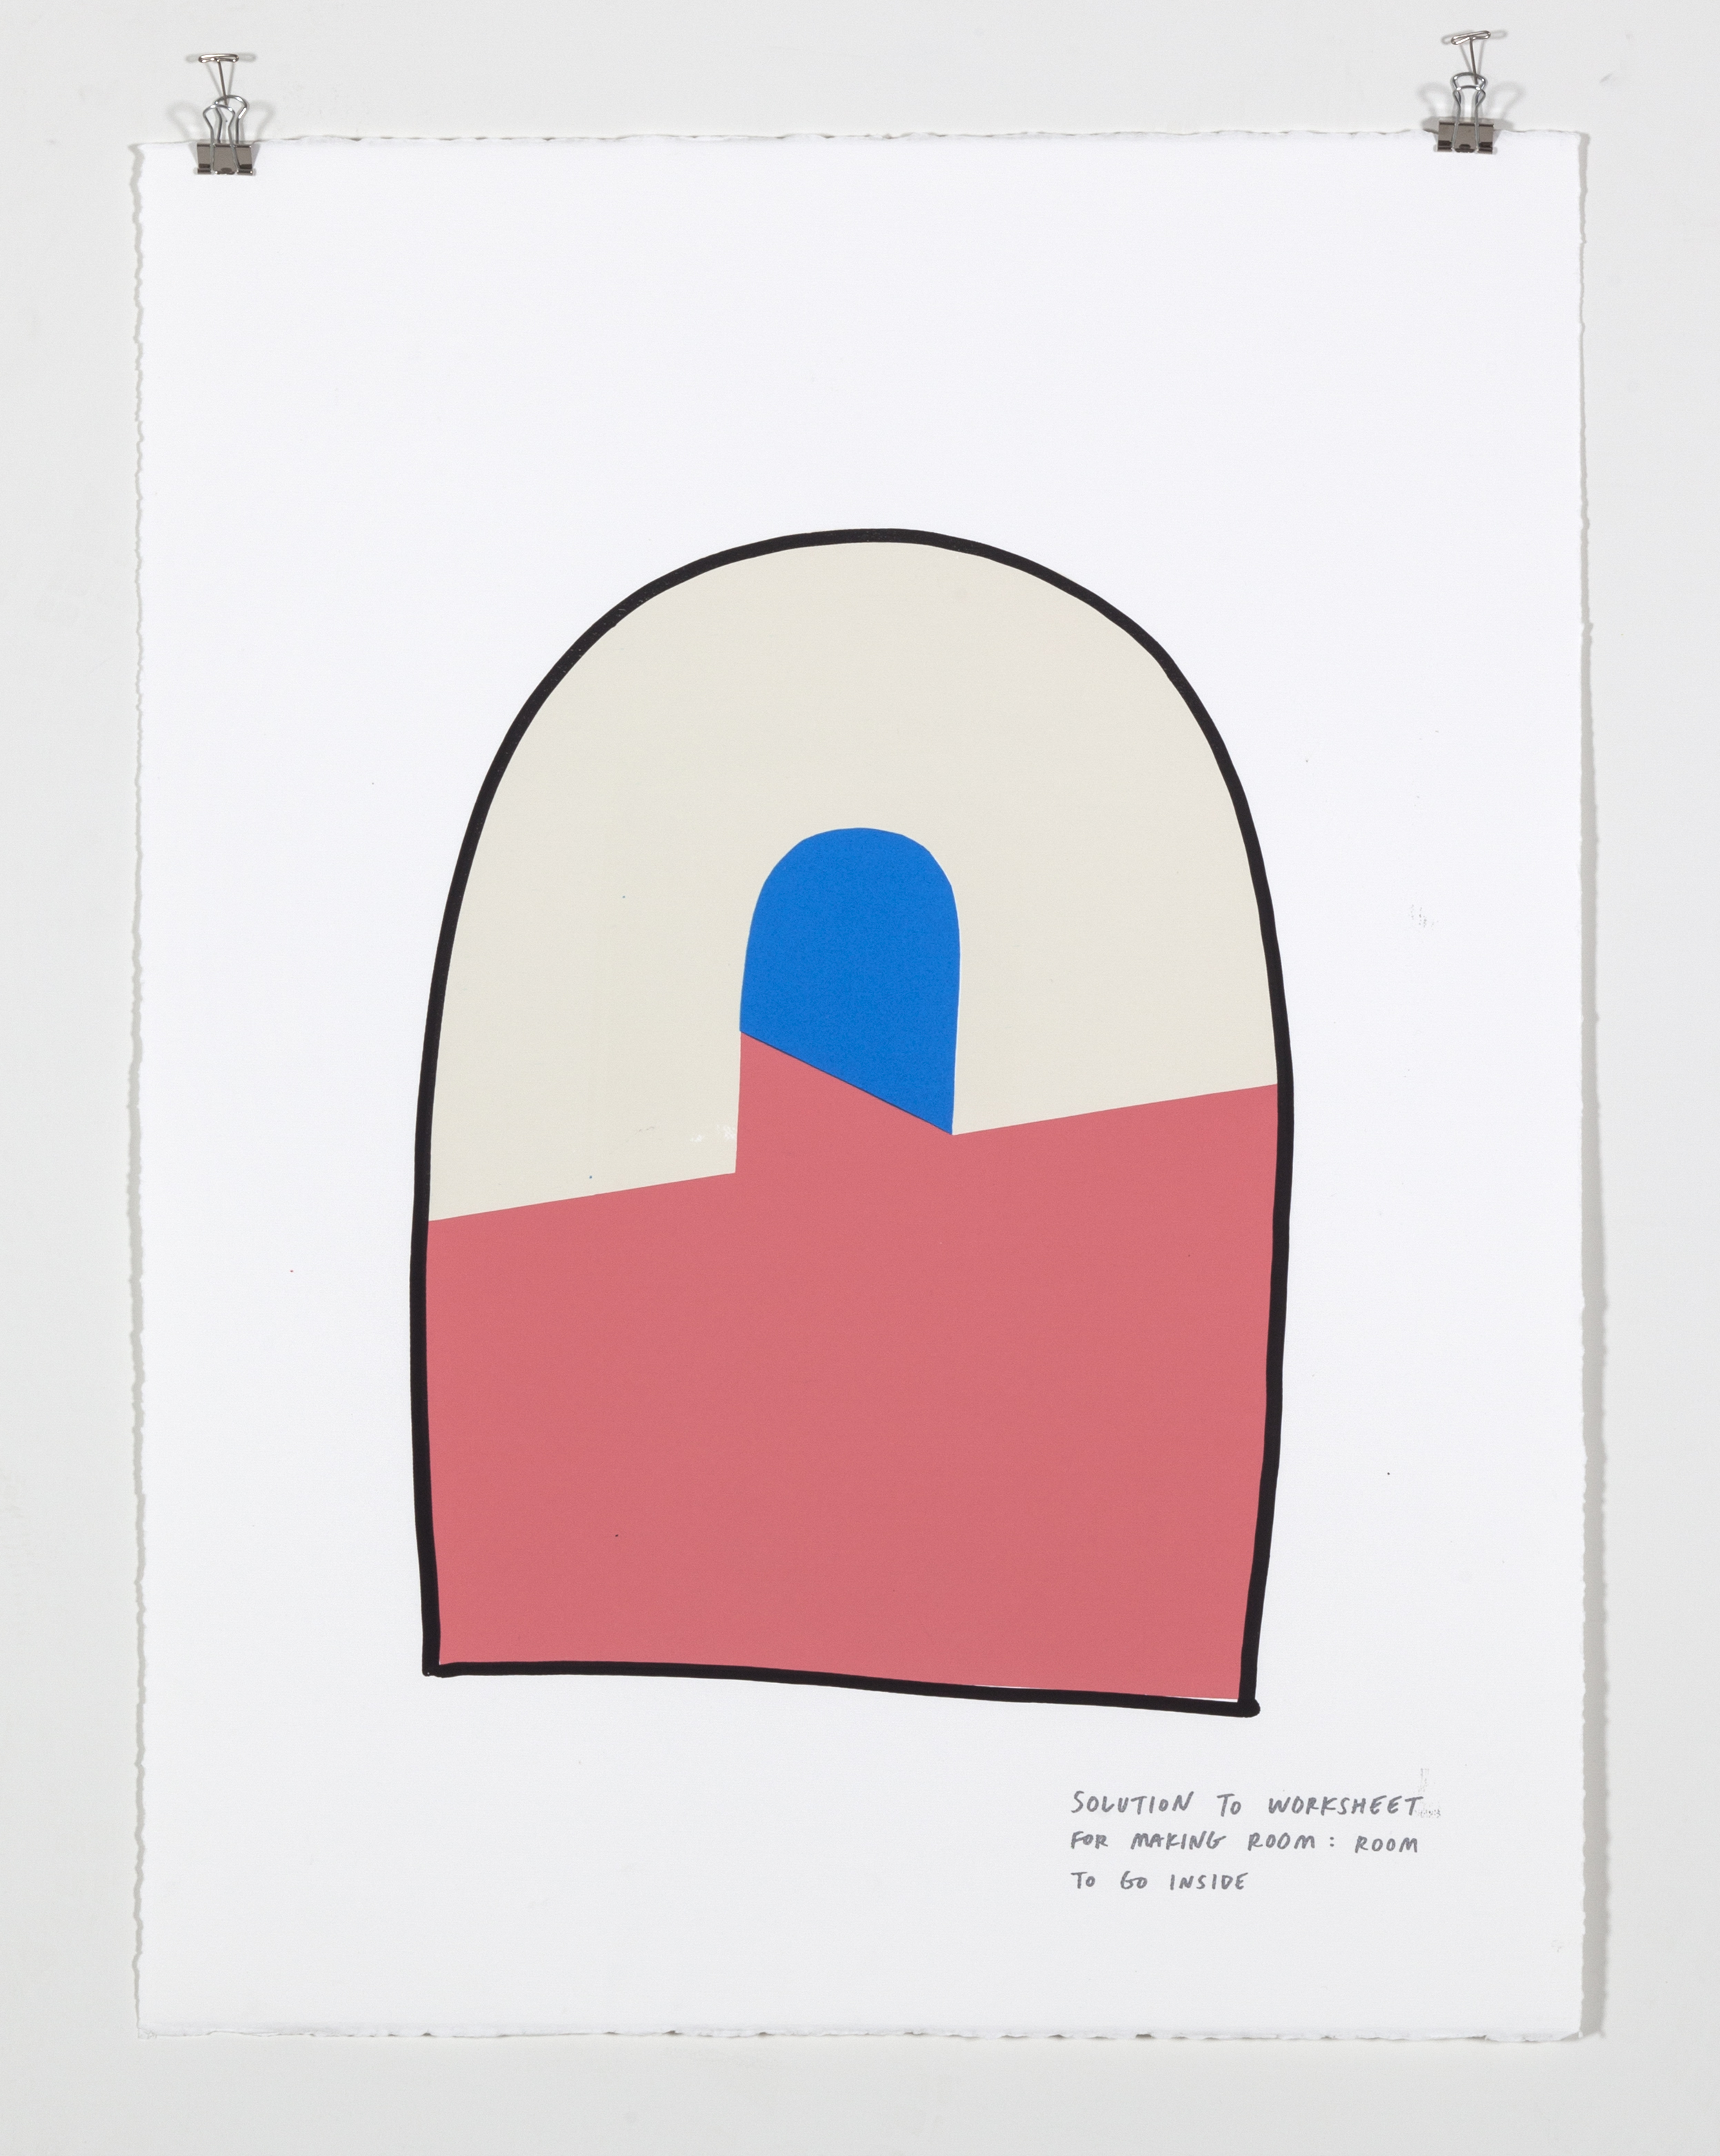    Solution to Worksheet for Making Room: Room to Go Inside,  2018  Five color silkscreen print on paper 19 7/8 x 25 7/8 inches 